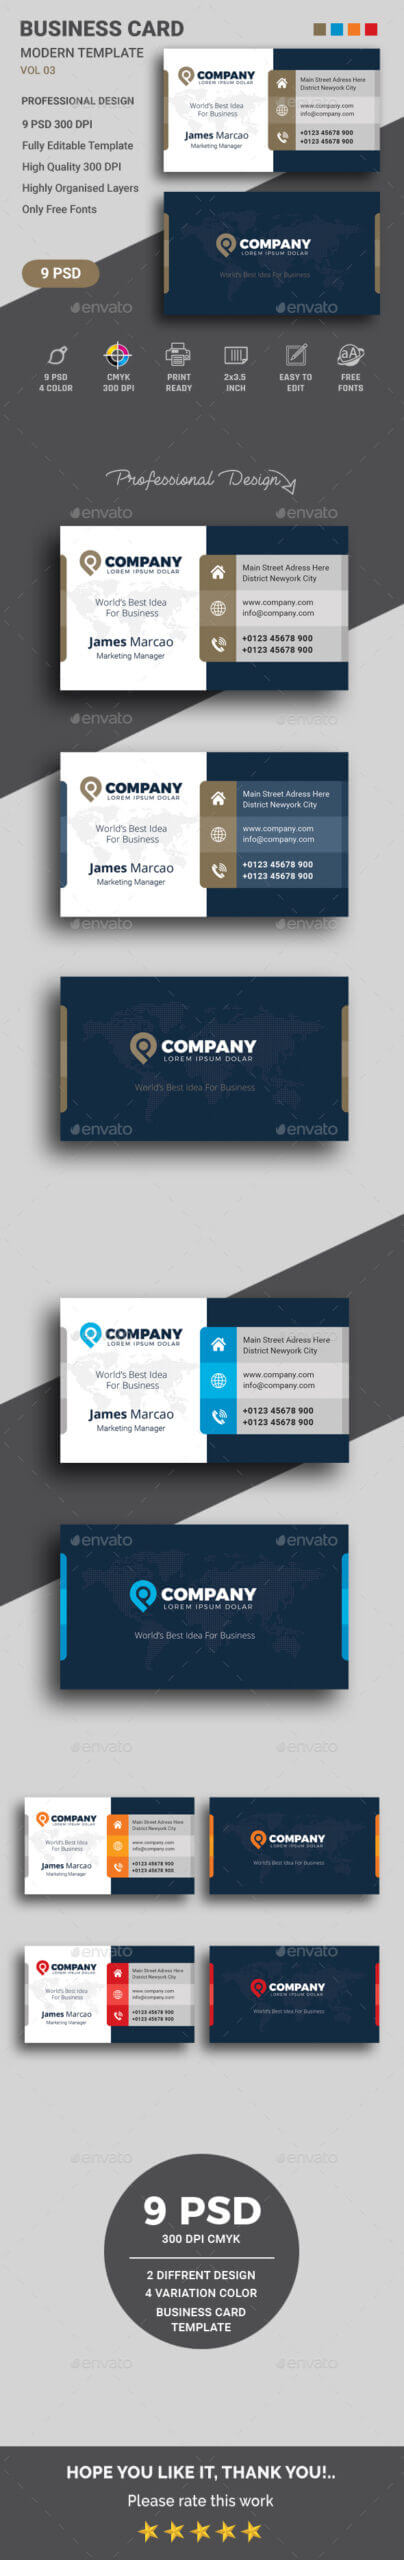 2020's Best Selling Business Card Templates & Designs Inside Business Card Maker Template